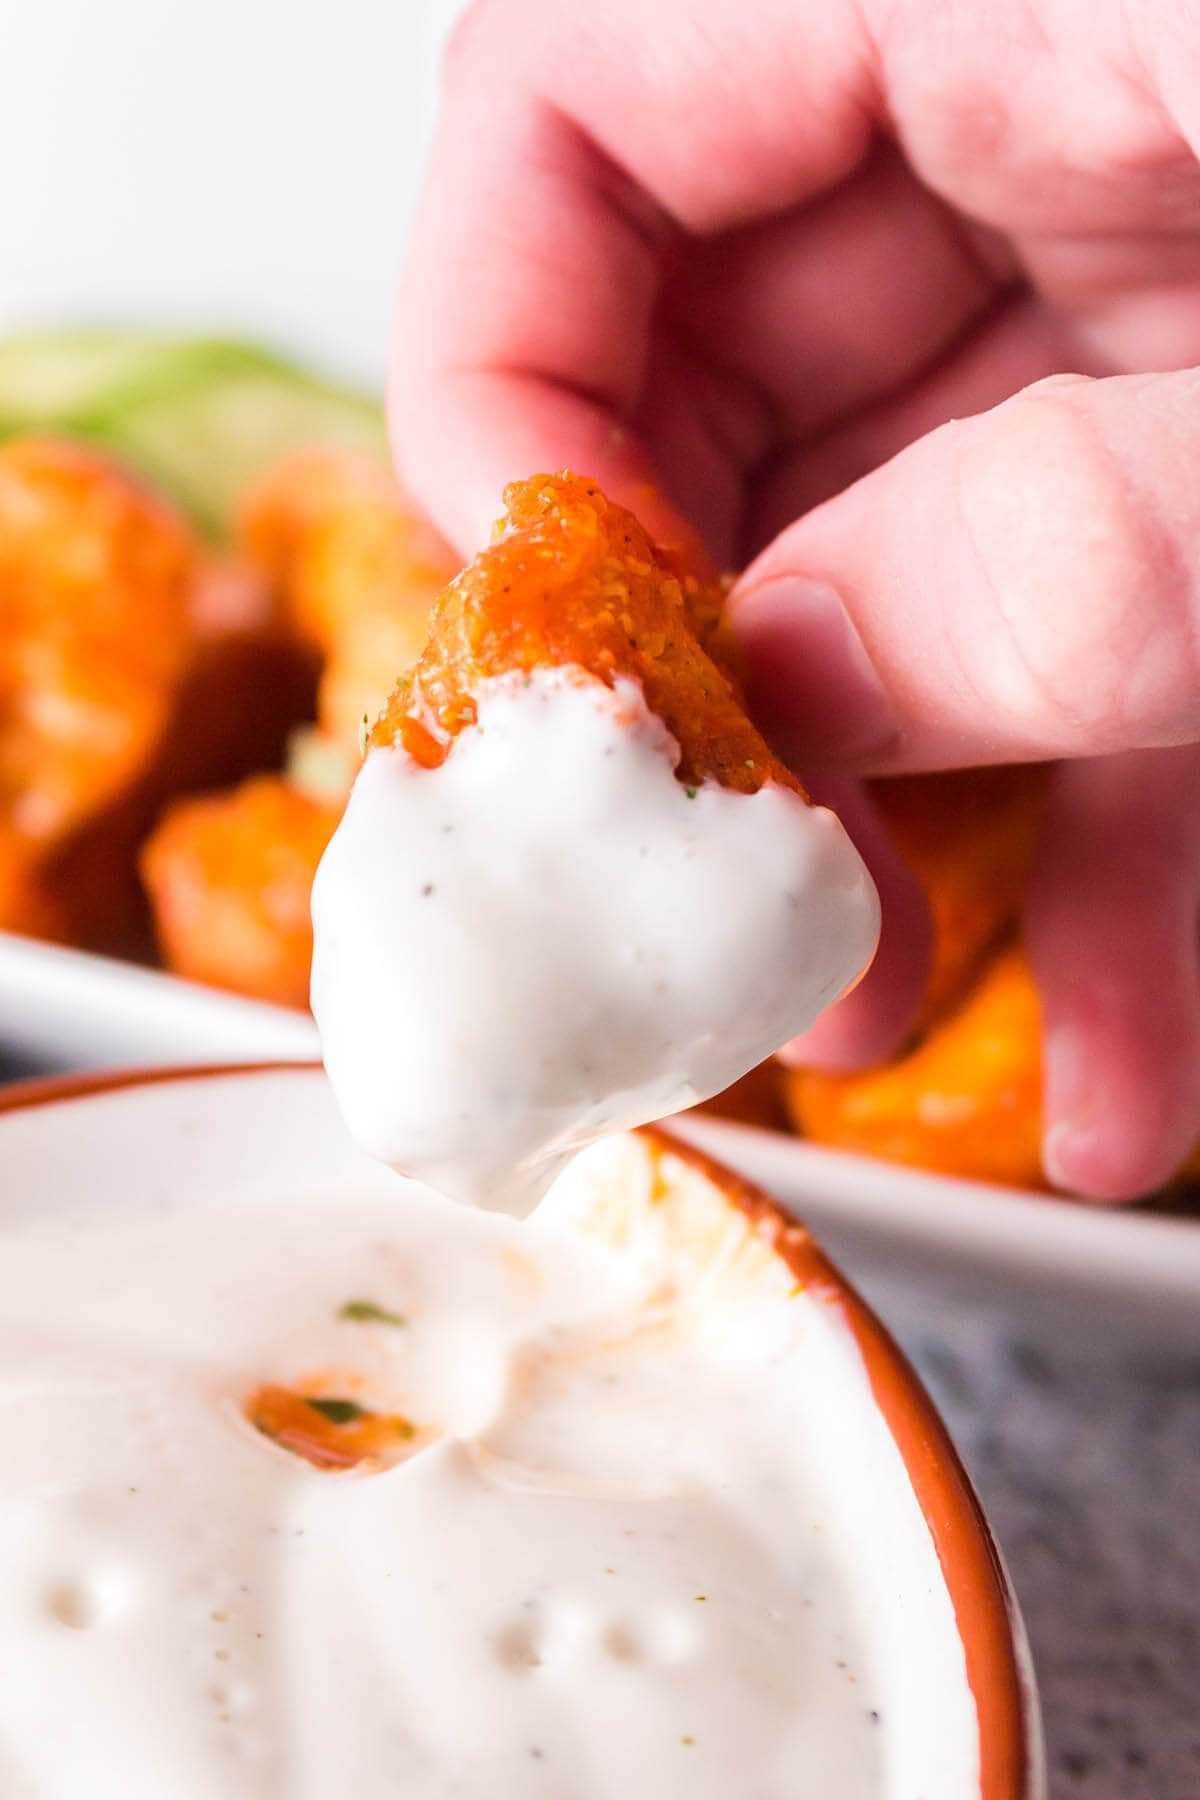 Chicken bites being dipped into ranch dressing.